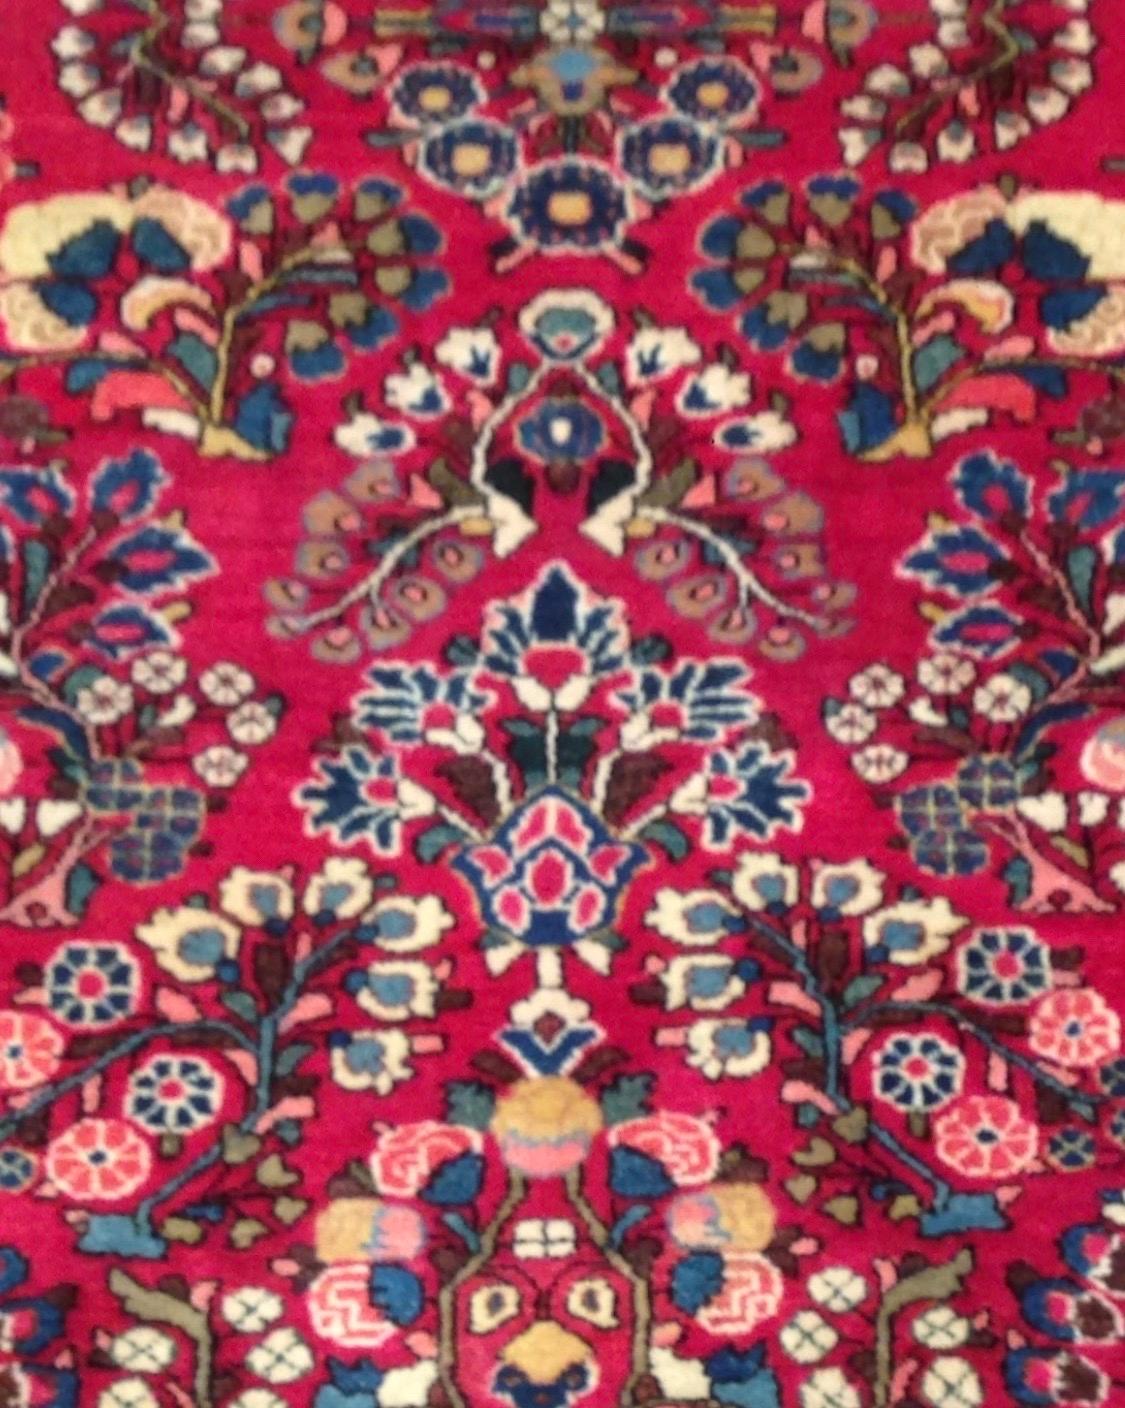 Sarouk is a small village and its neighboring villages in Northwestern Iran. Most Sarouk carpets follow a very distinctive design and is depended on floral sprays and bouquets. 

This is a fine example of an antique Sarouk carpet dating from the